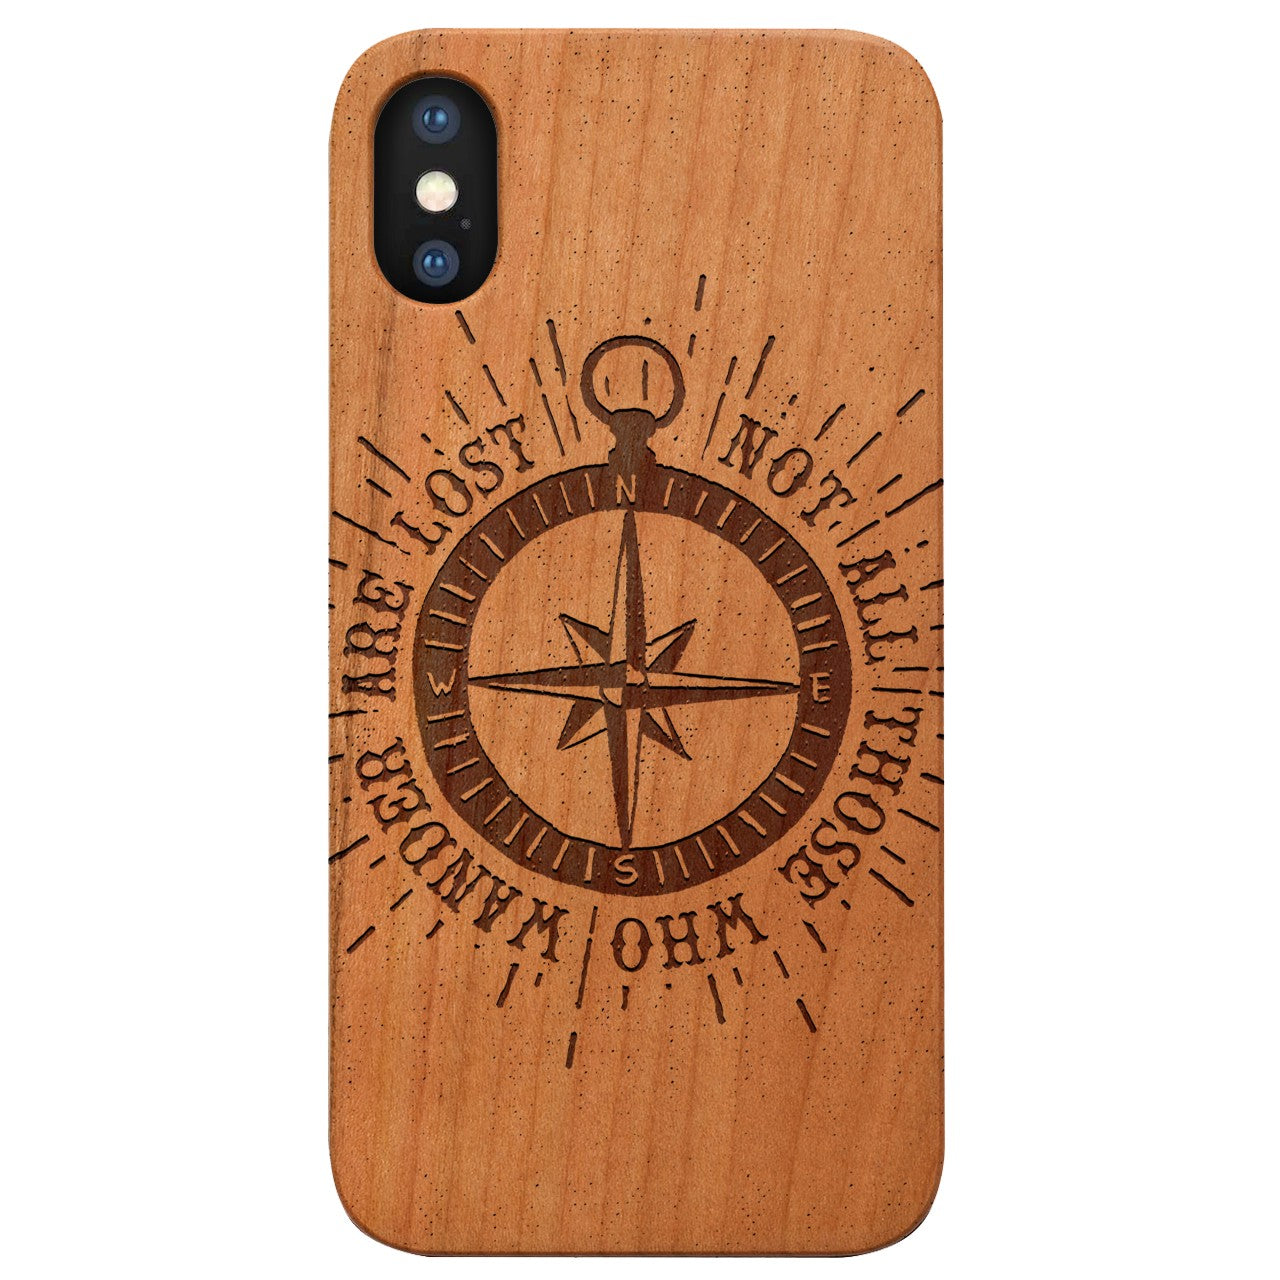  Retro Compass - Engraved - Wooden Phone Case - IPhone 13 Models